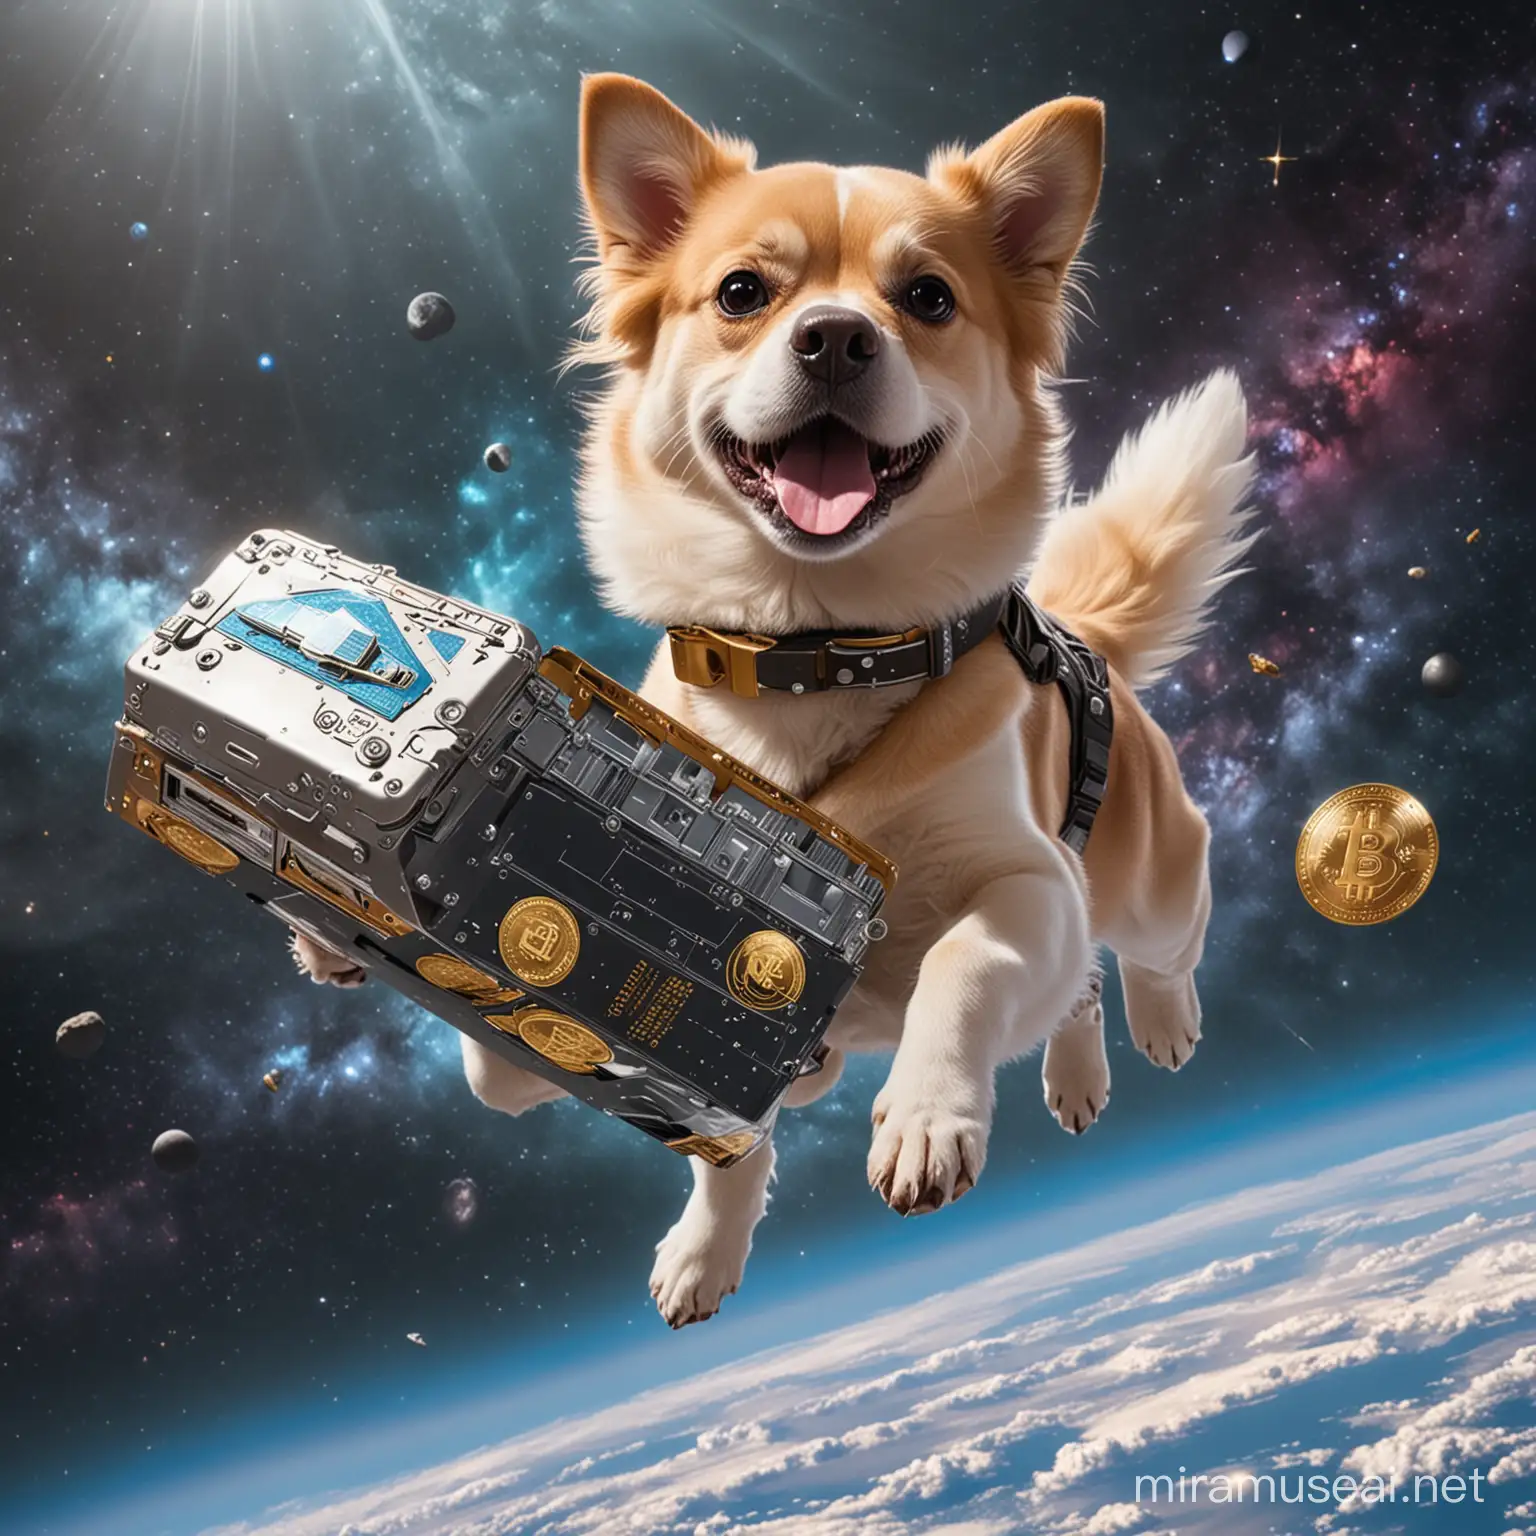 a millionaire dog flying in space with its crypto wallet